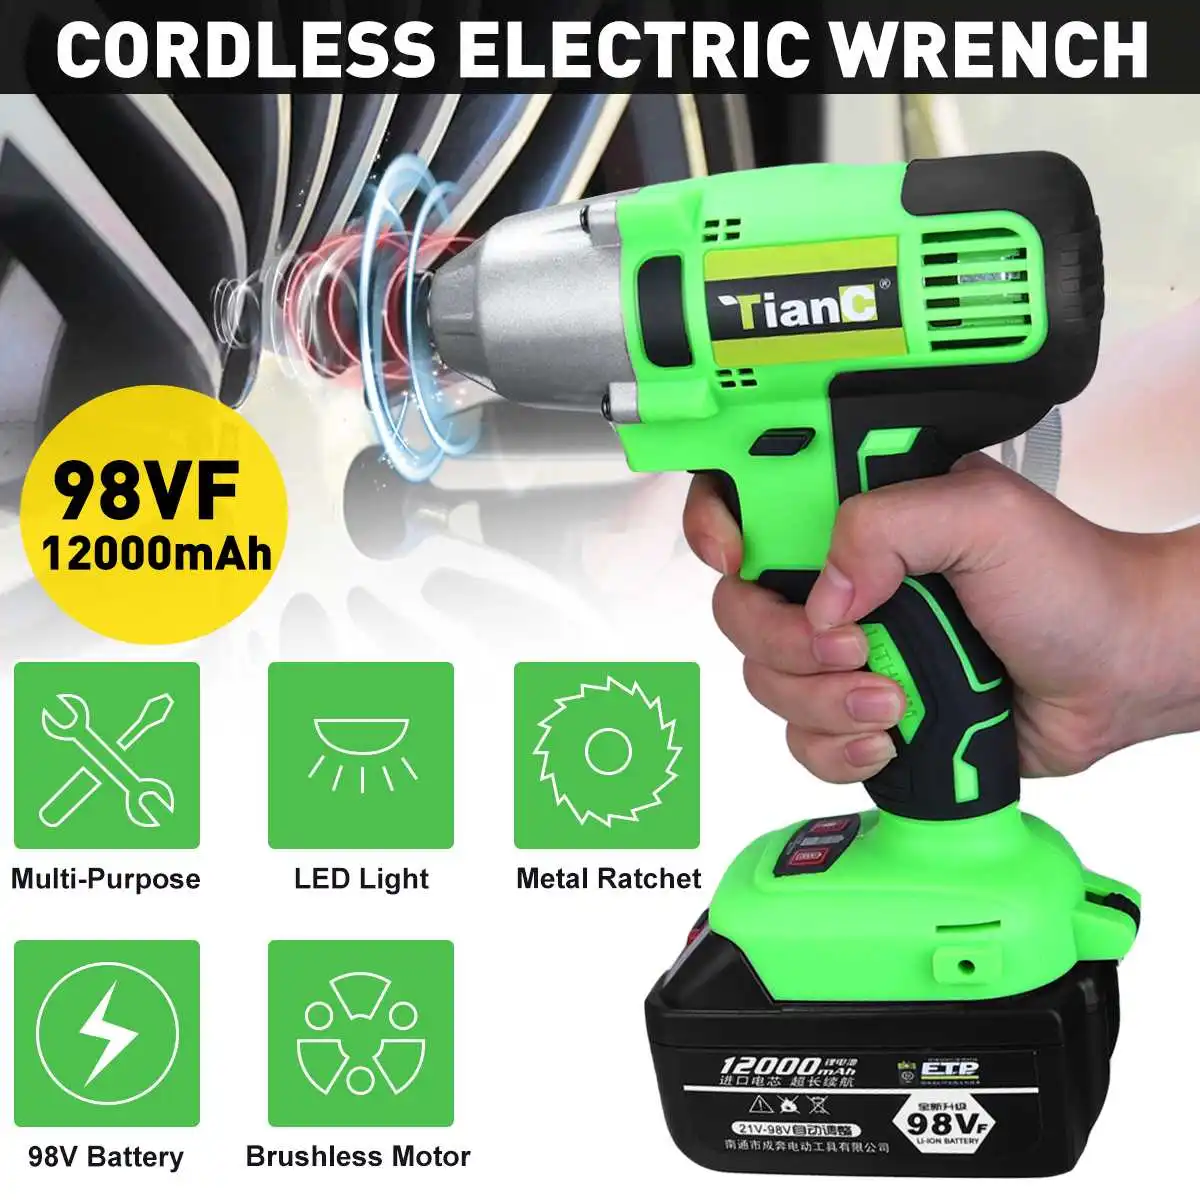 

98VF 12000mAh Brushless Electric Impact Wrench 520N.m Torque 1/2 Wrench Li-ion Batery Power Tools Adapt to 18V Battery